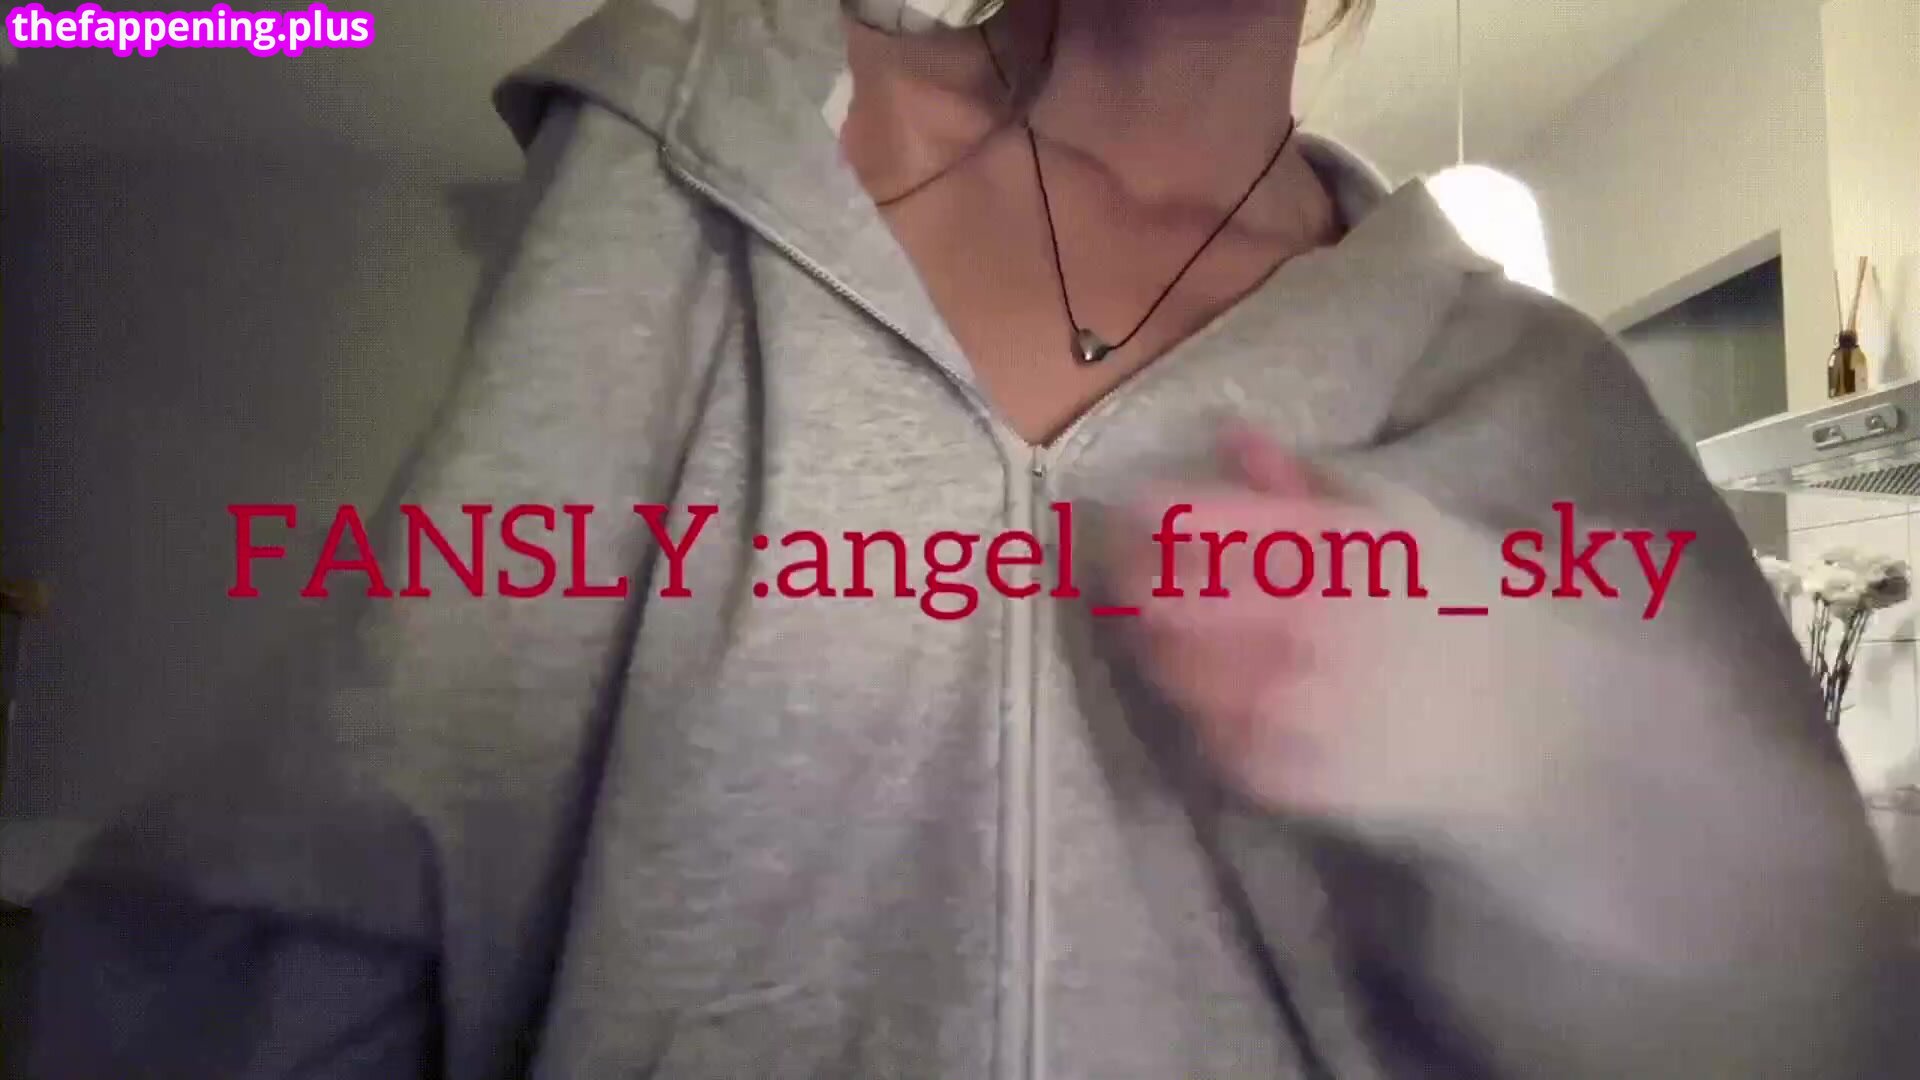 Angel_from_sky